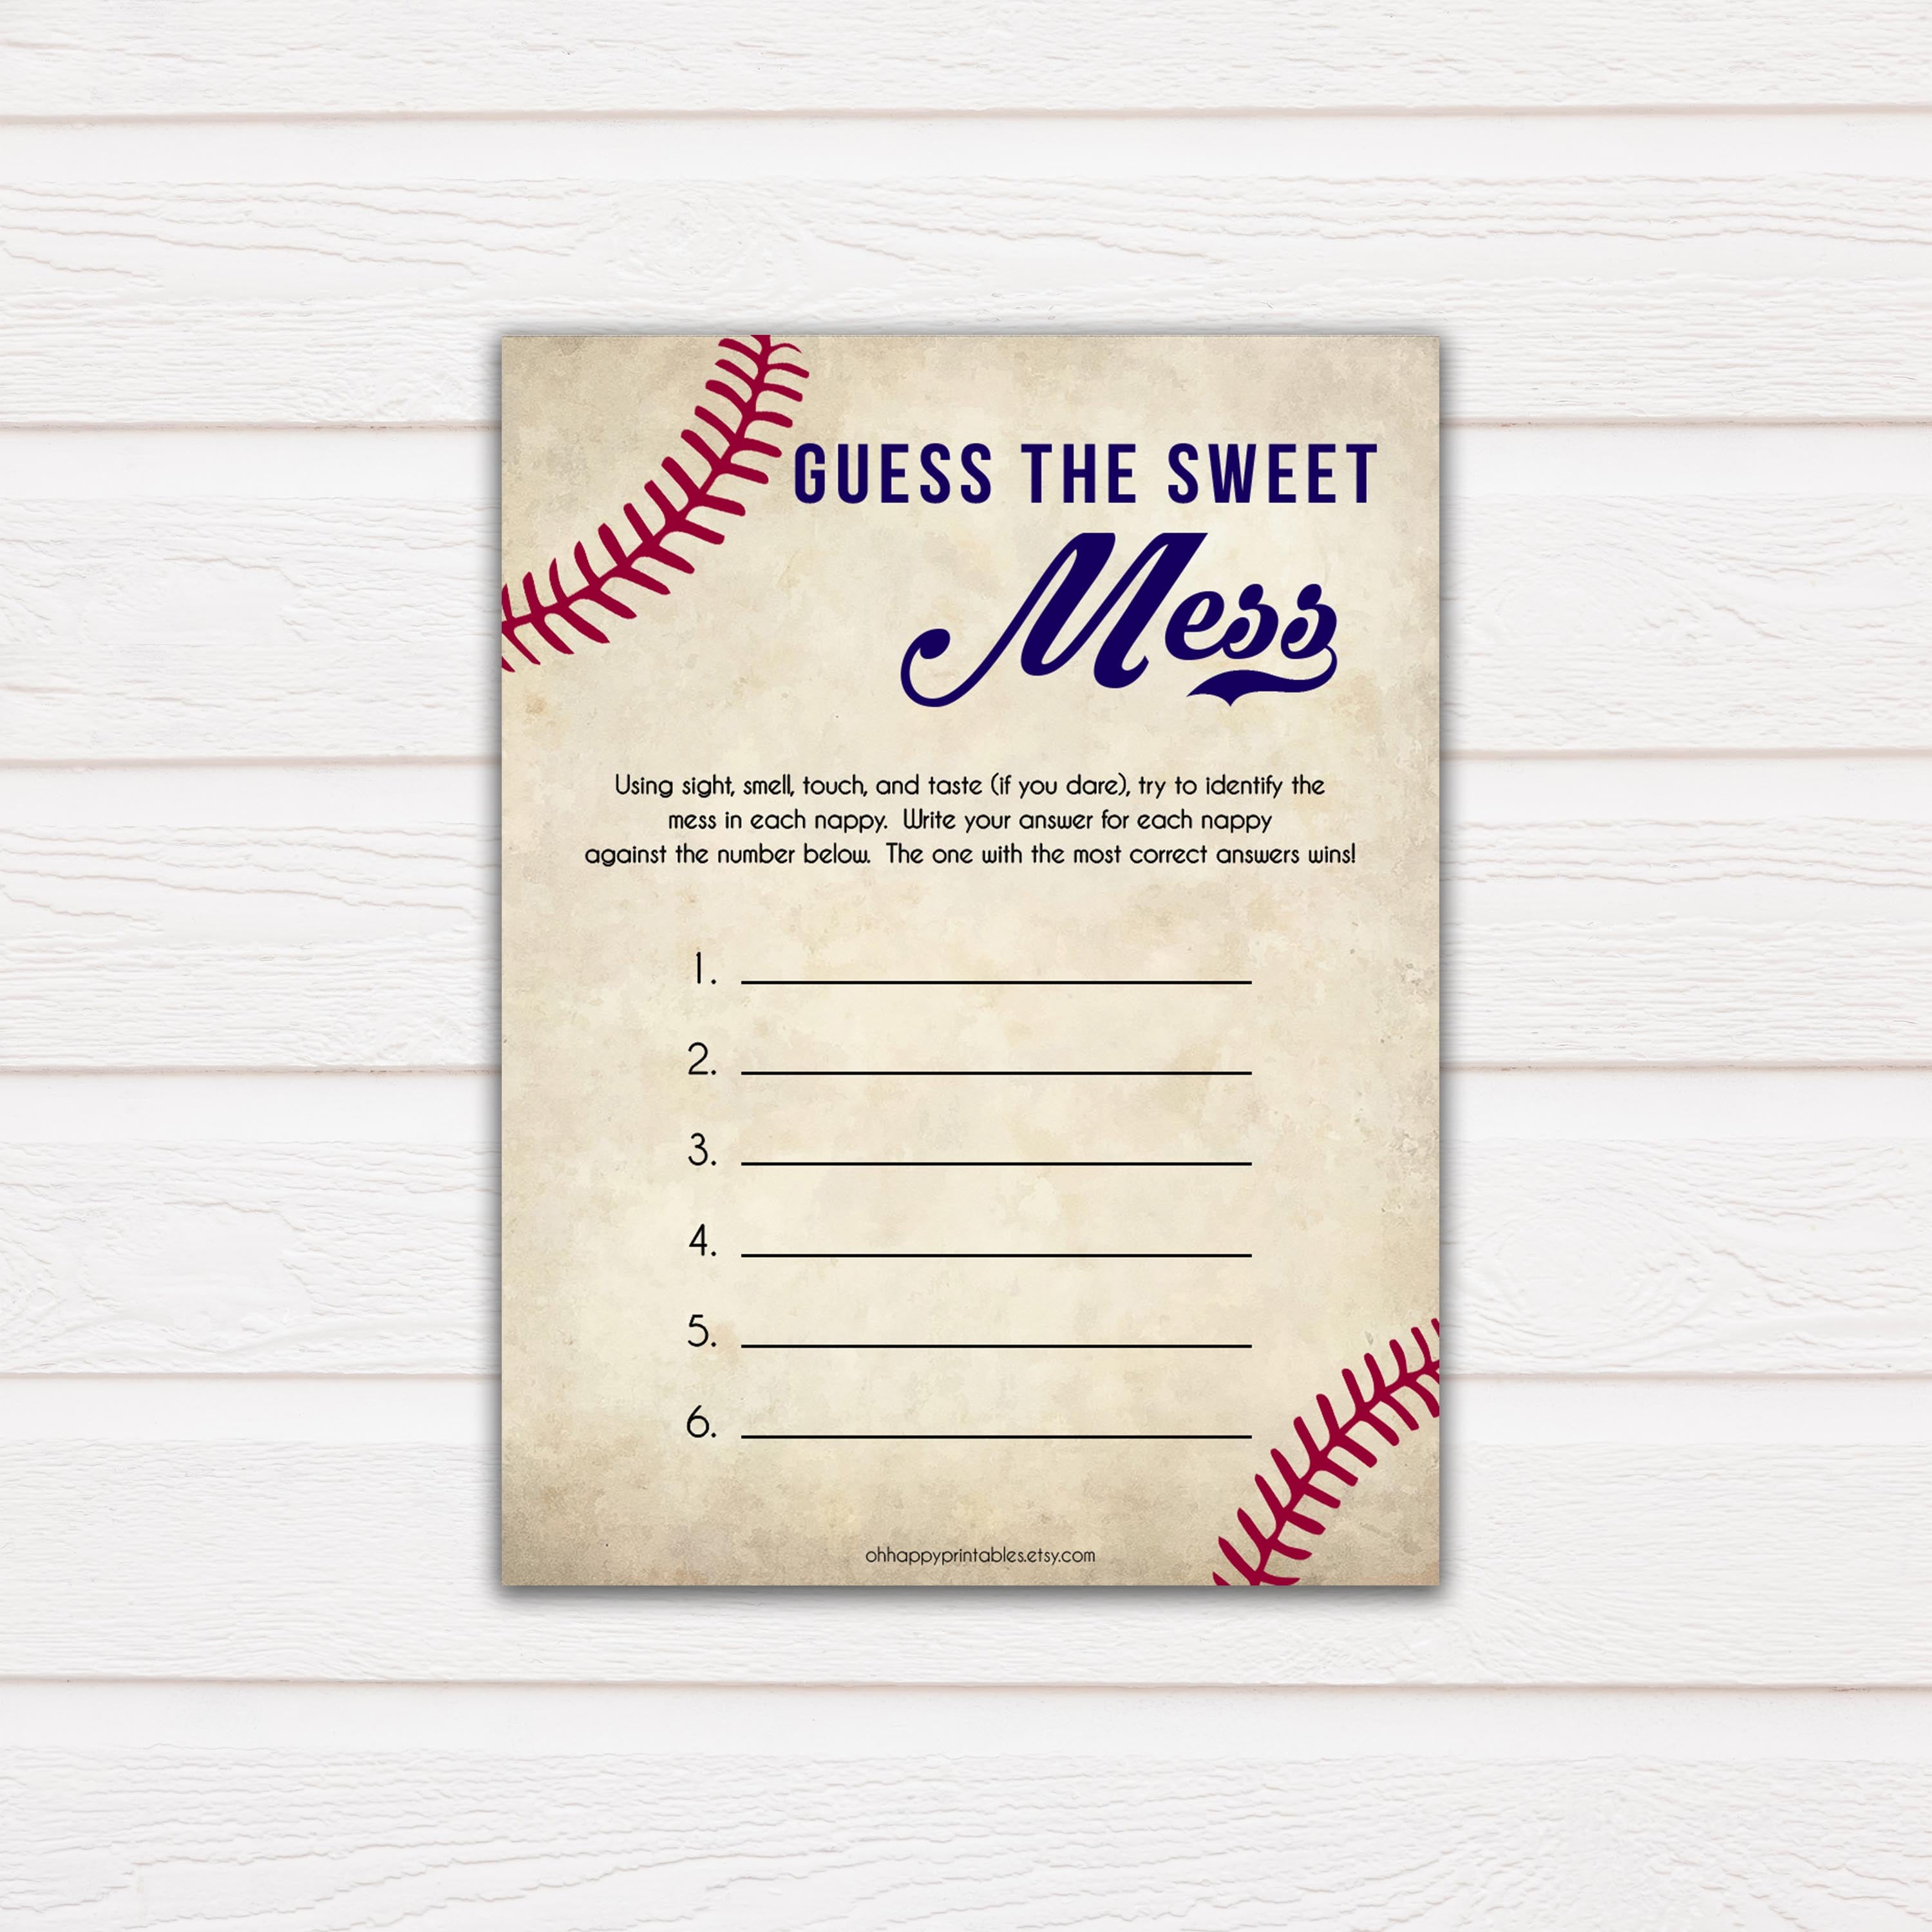 Baseball Baby Shower Guess The Mess Game, Baseball Baby Shower Guess The Sweet Mess, Baby Shower Games, Guess The Mess, Fun Baby Games, printable baby shower games, fun baby shower games, popular baby shower games